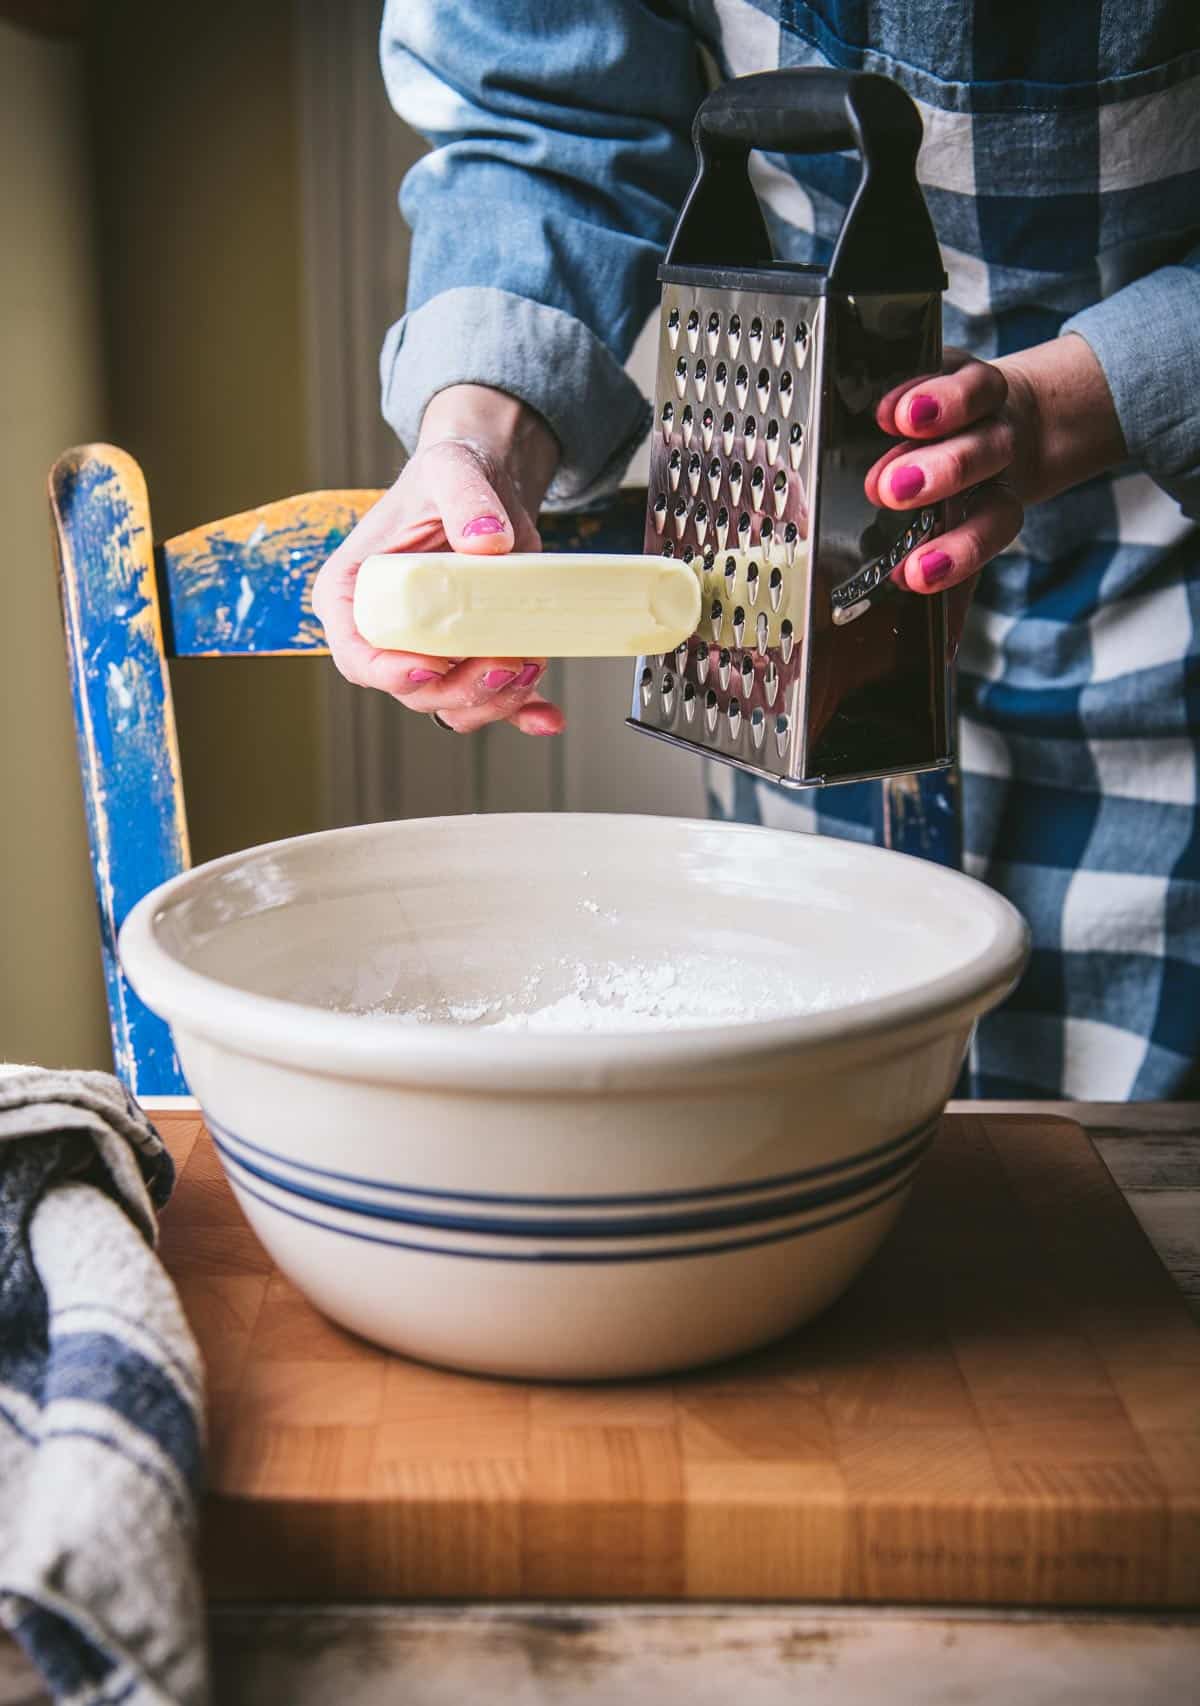 Grating butter into a mixing bowl.